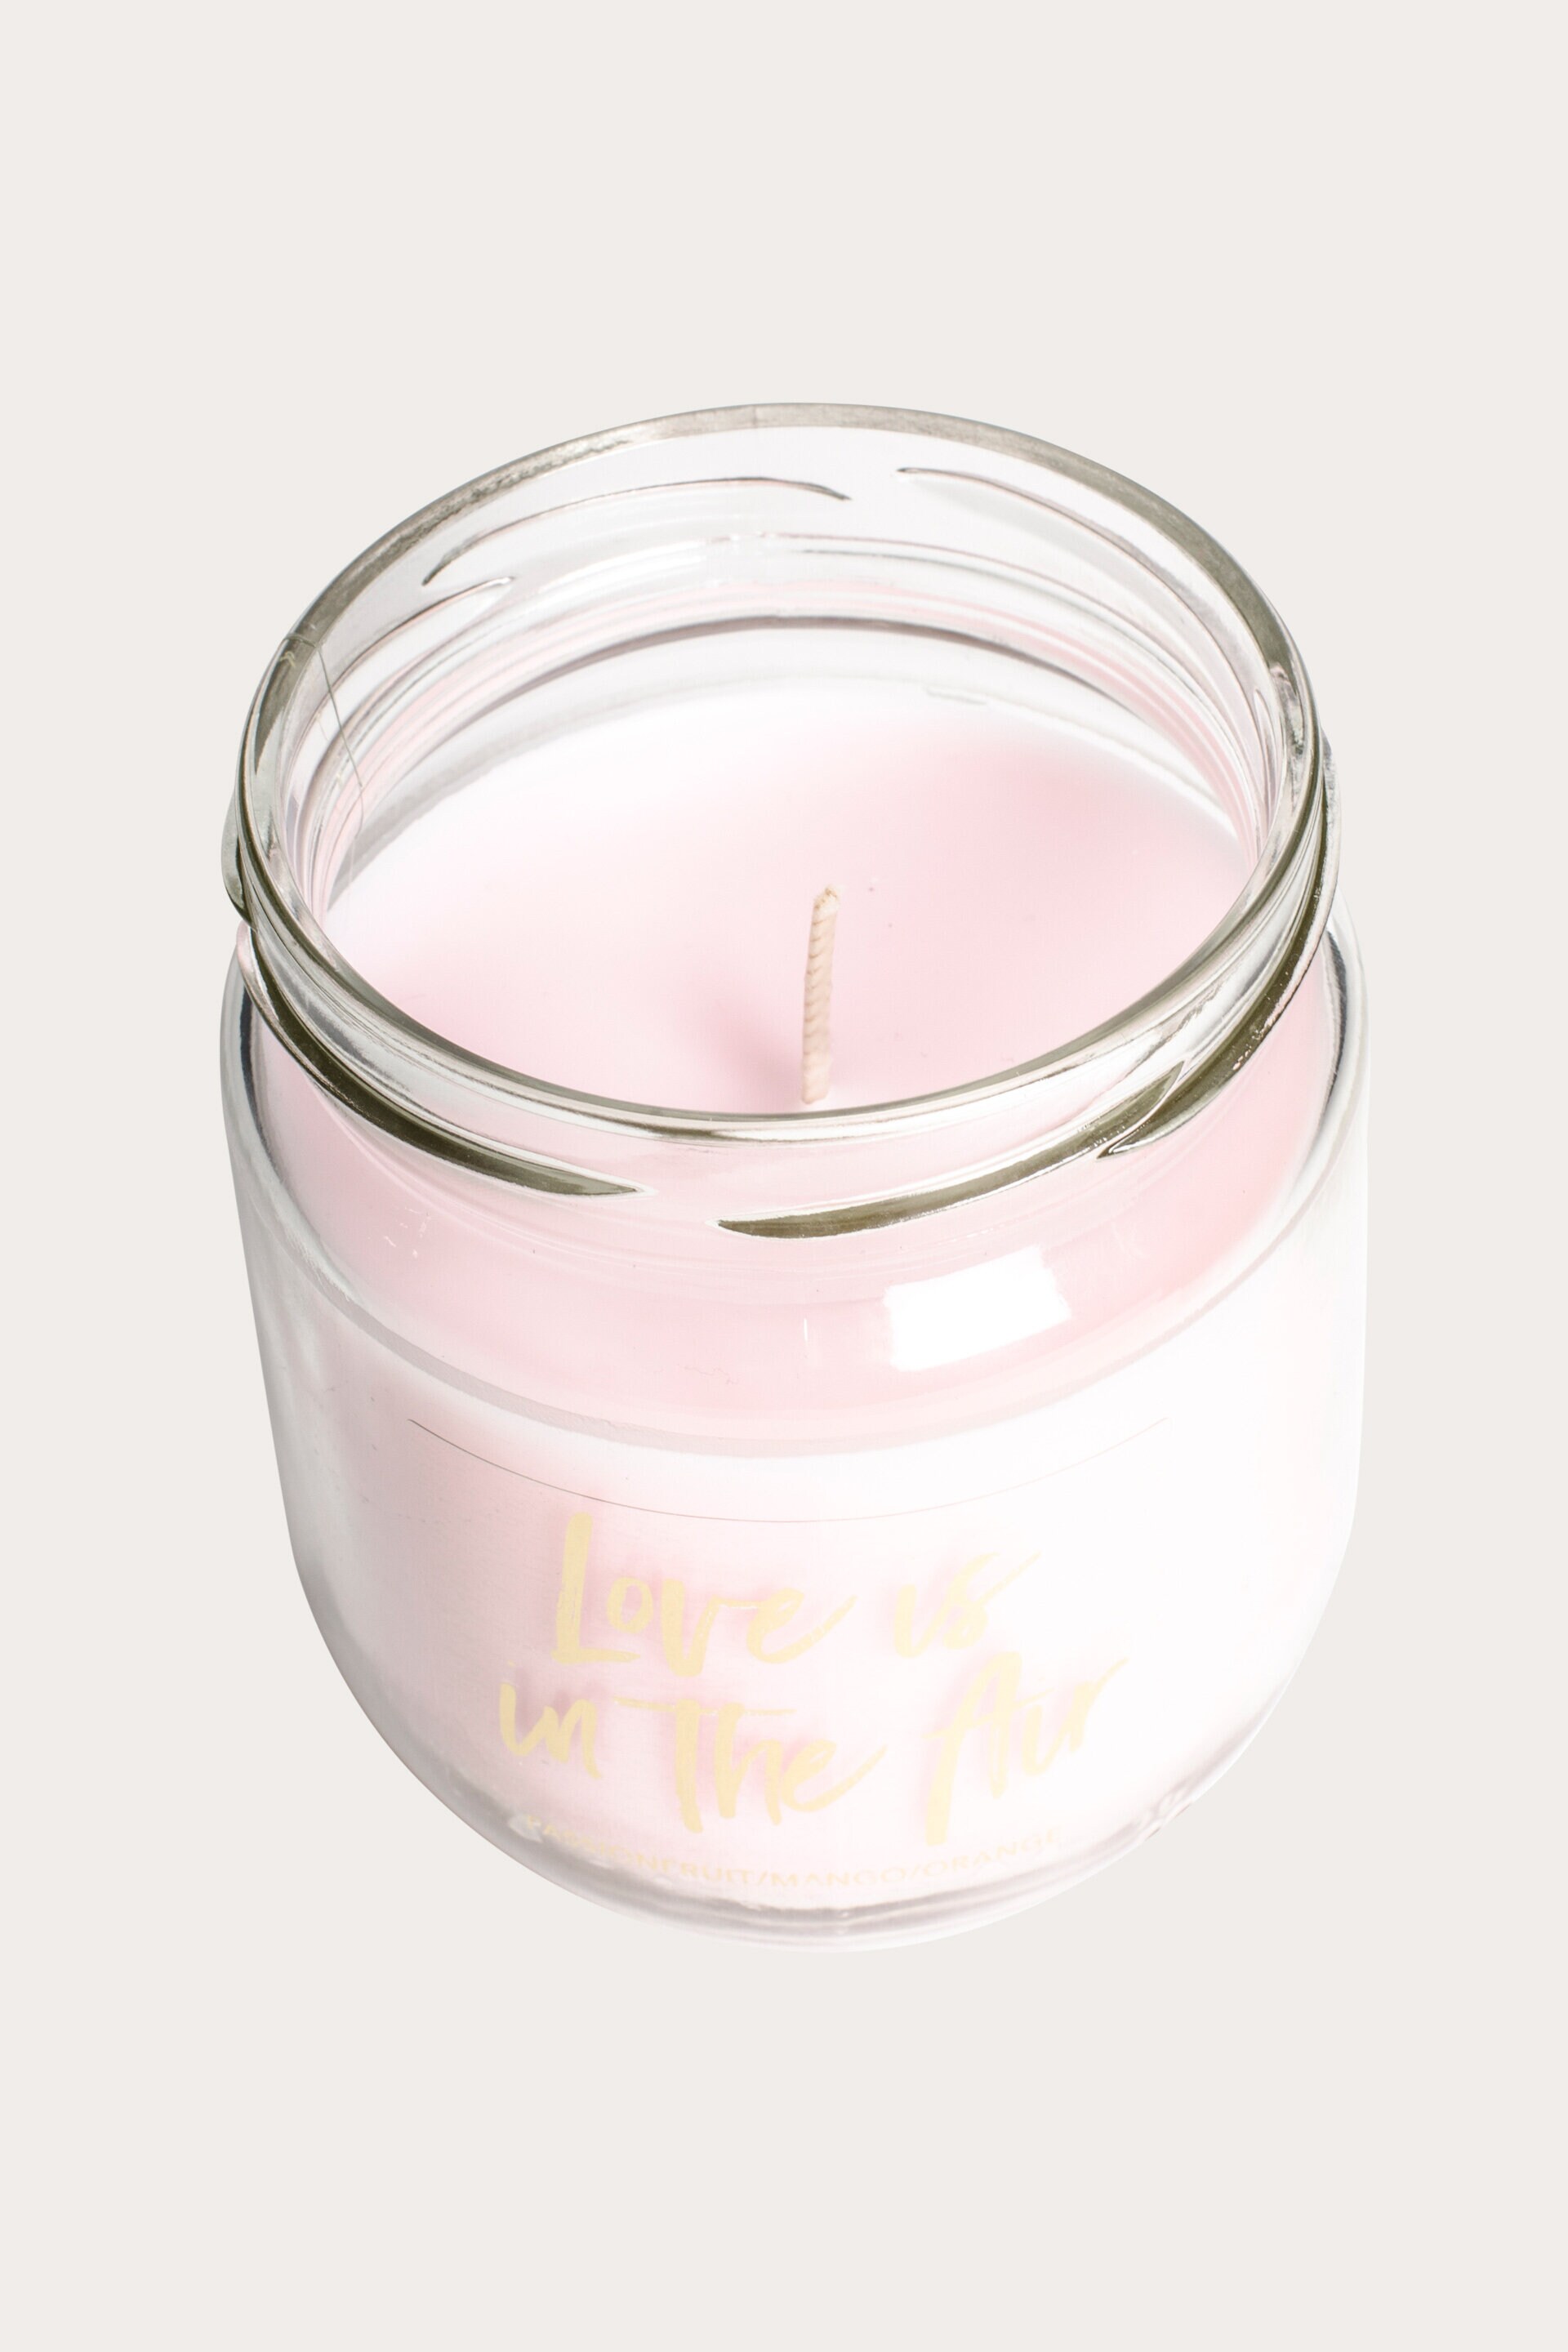 LOVE IS IN THE AIR scented candle